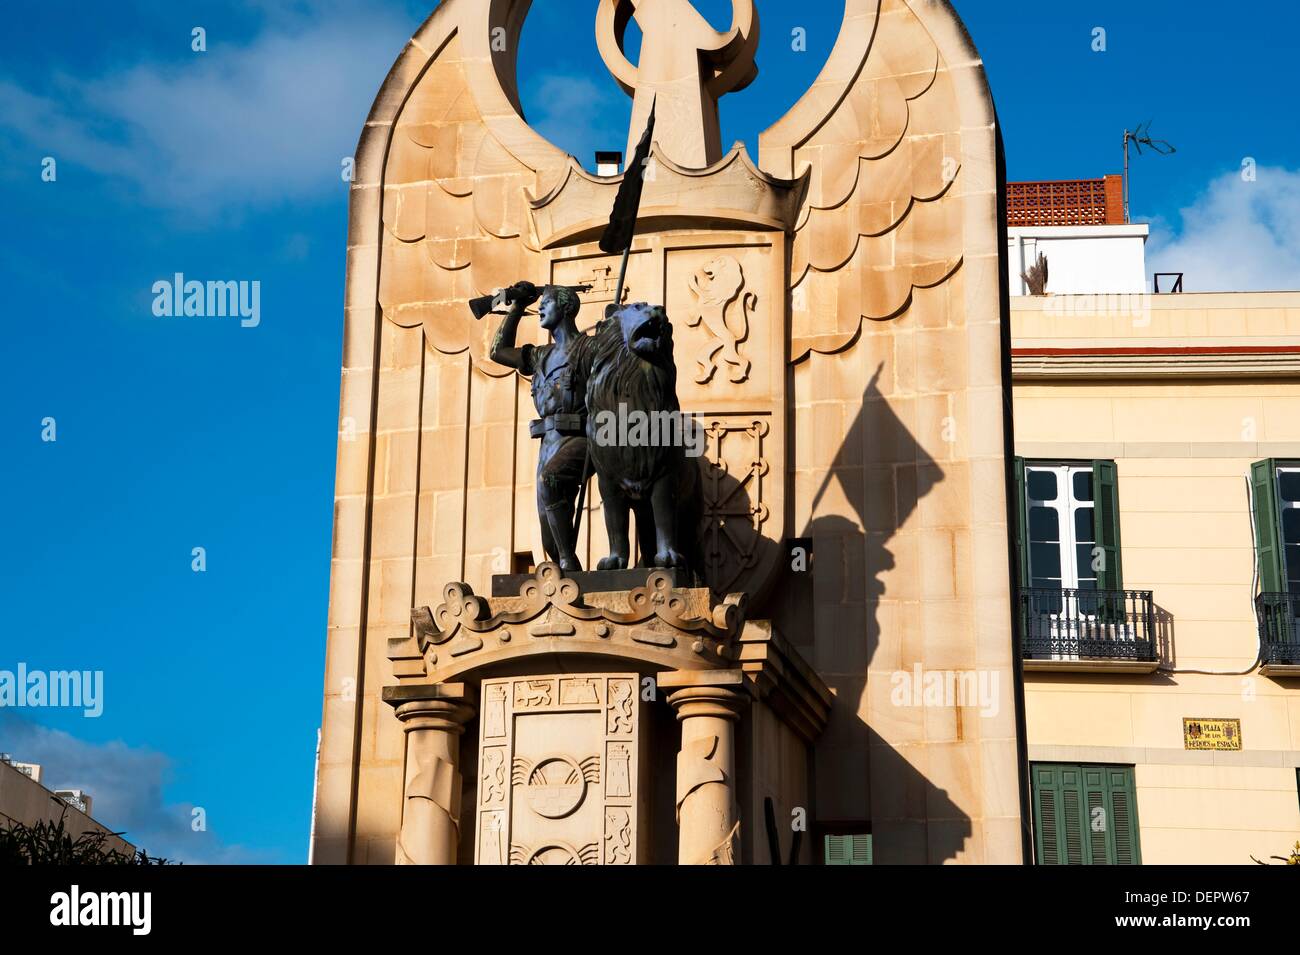 Monument to Spain from Franco dictatorship, Melilla, Spain, Europe Stock Photo